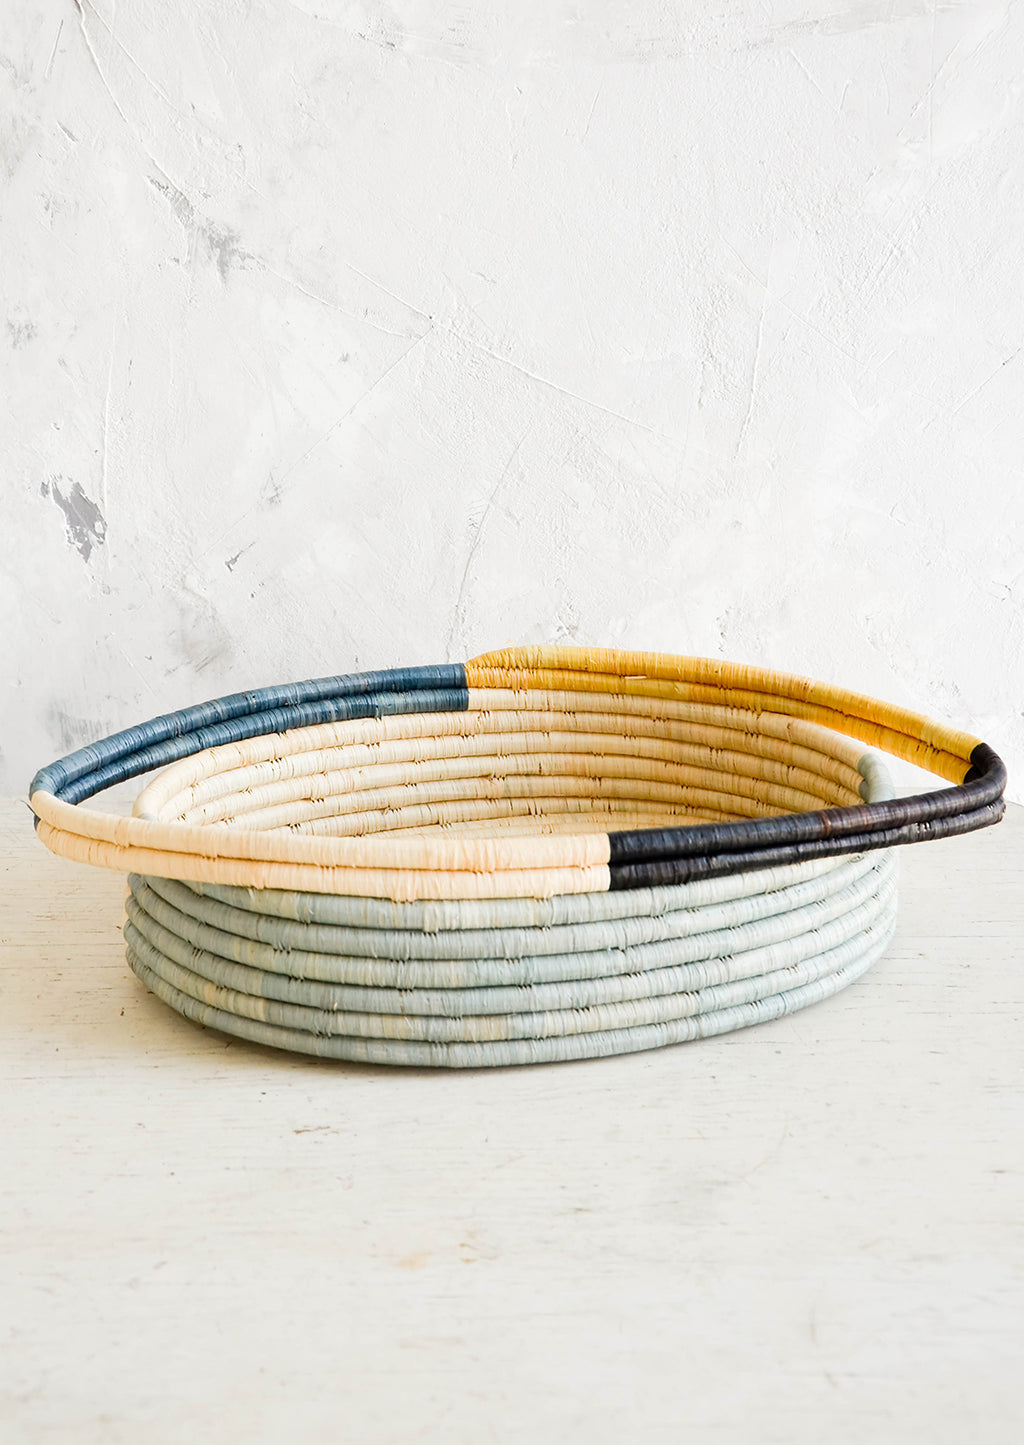 2: Oval bread basket in woven raffia with protruding handles at either side, sitting on a table.